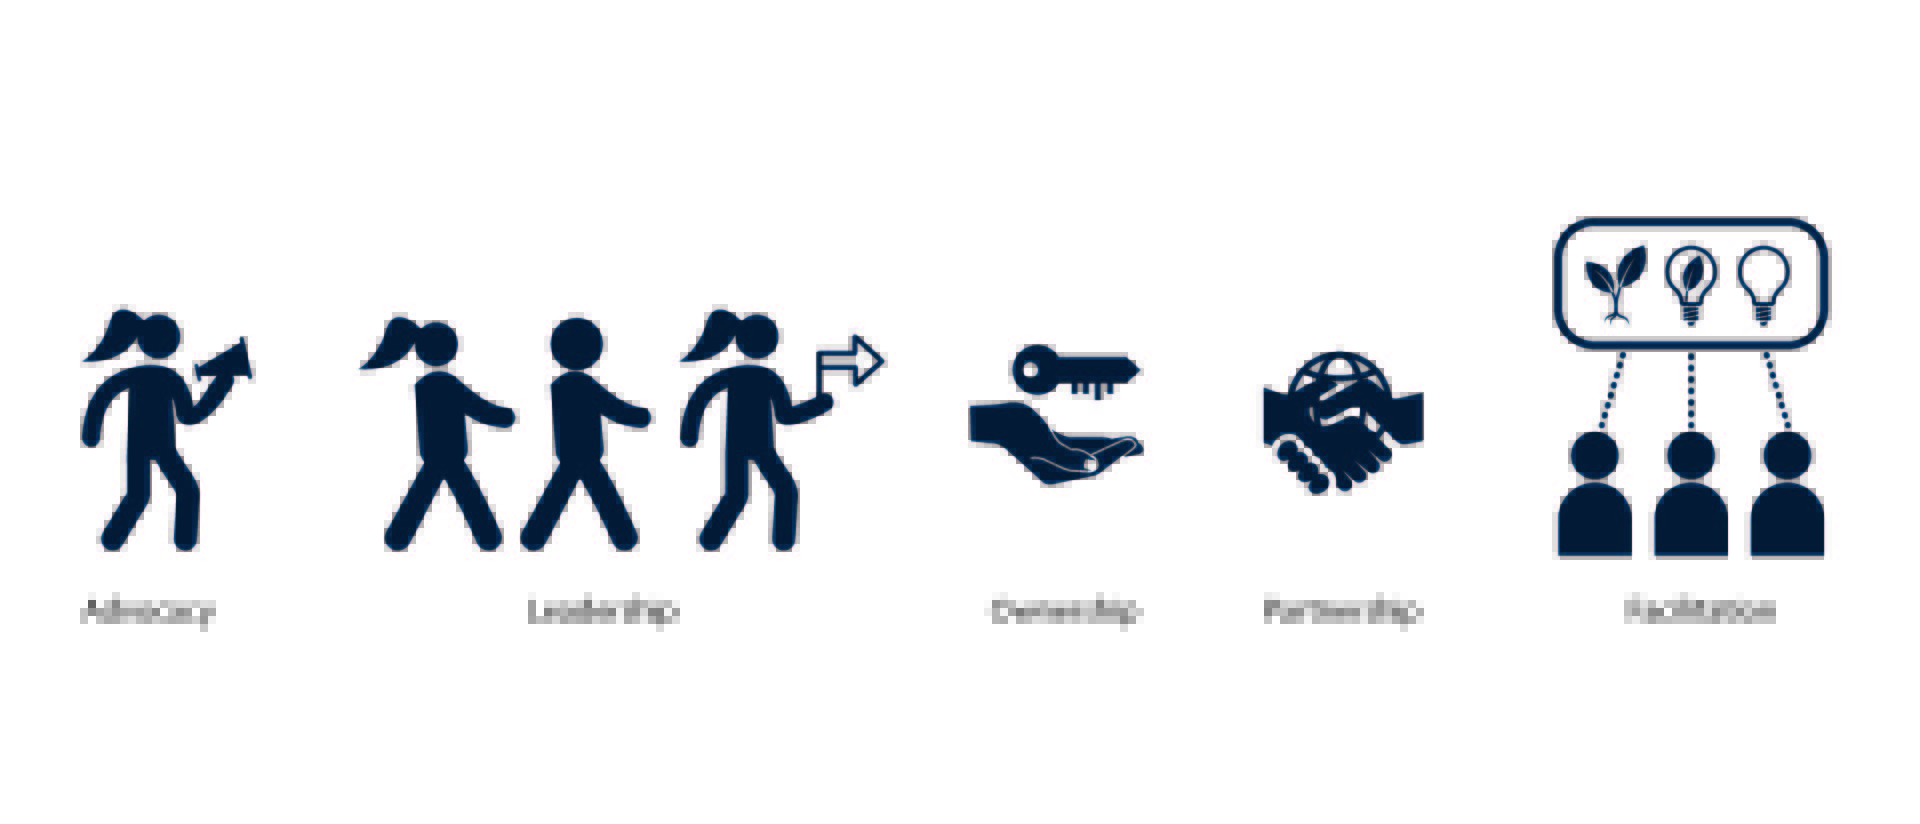 Icons illustrating five roles in delivering the plan: advocacy, leadership, ownership, partnership and facilitation.